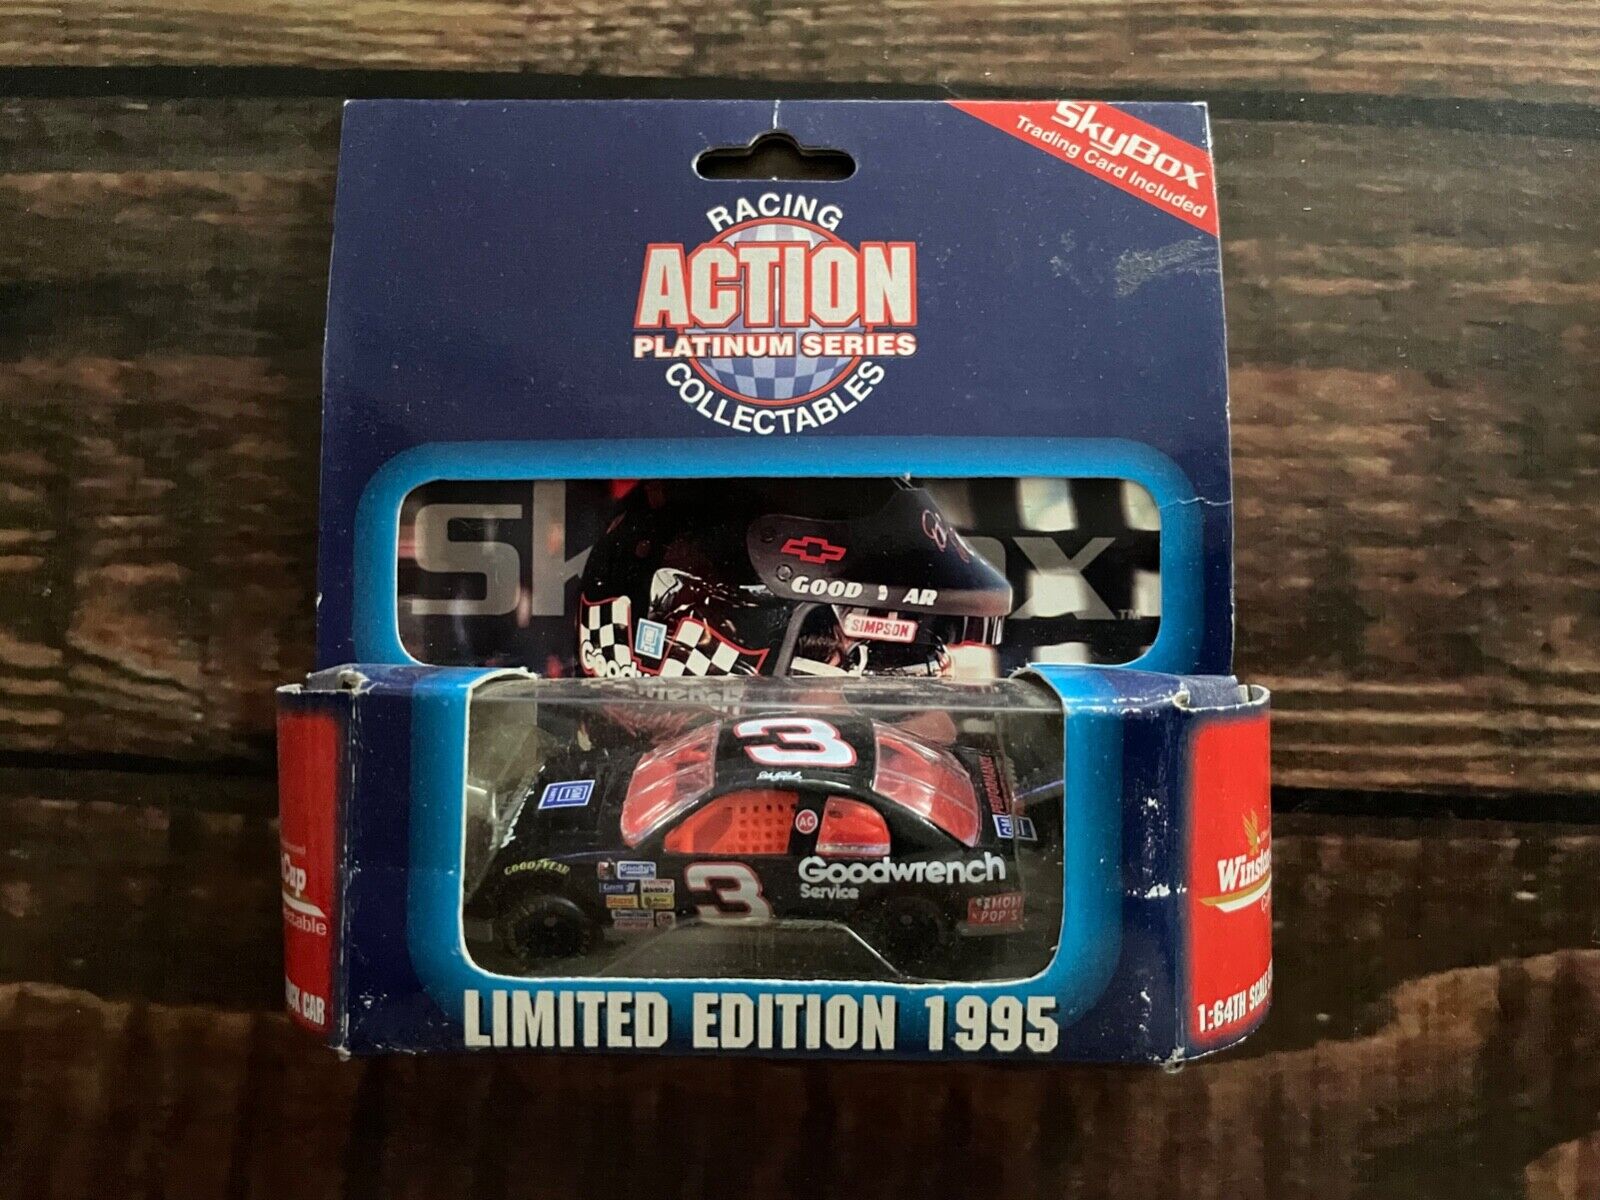 1995 Action Platinum Dale Earnhardt #3 1:64 Super beauty product restock quality top Goodwrench t Scale 7 Max 82% OFF